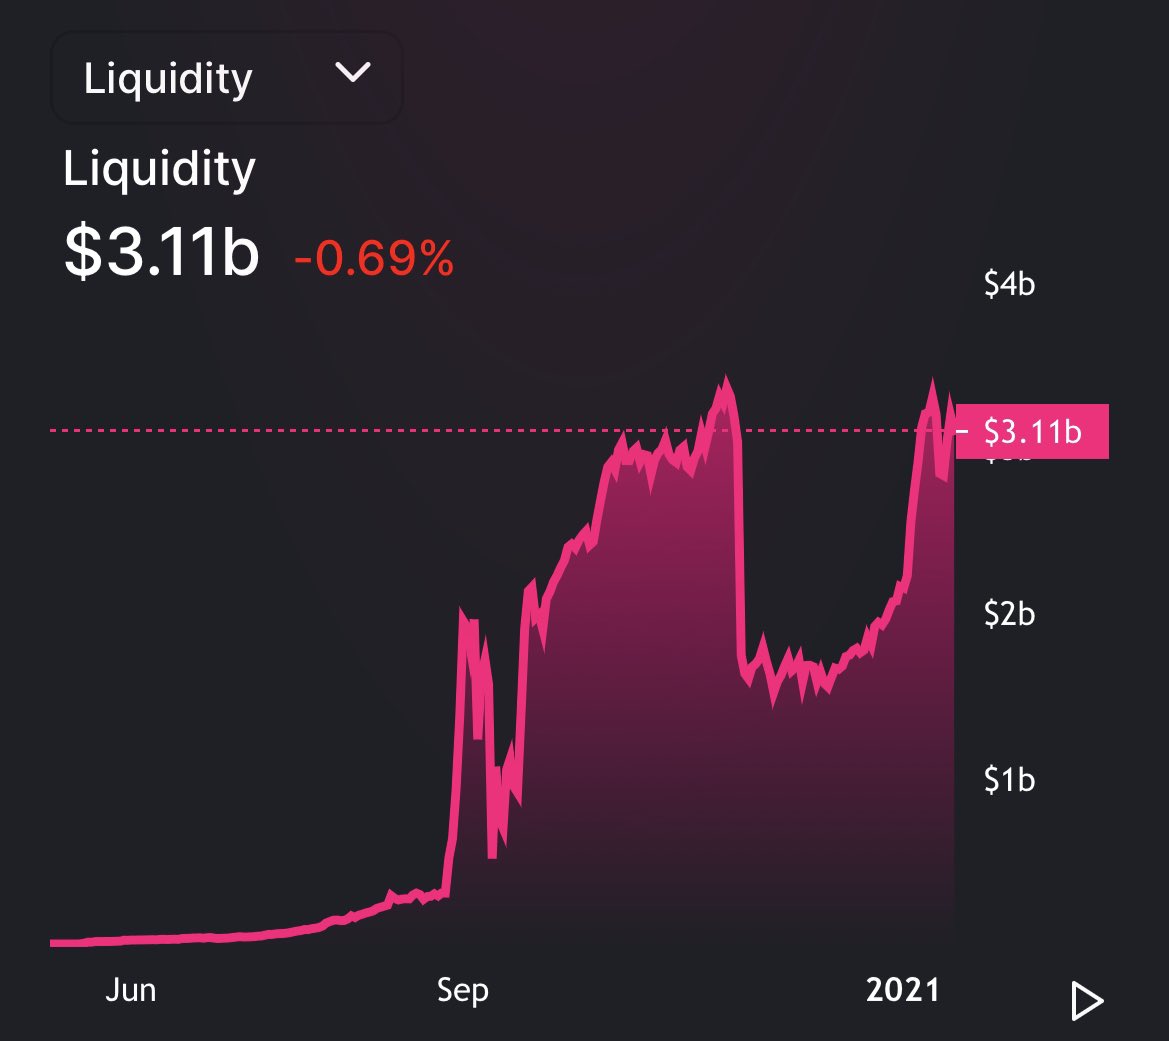 Uniswap isn’t offering any direct liquidity incentives, though this hasn’t stopped it from capturing massive amounts of liquidity due to the trading volume on the platform.